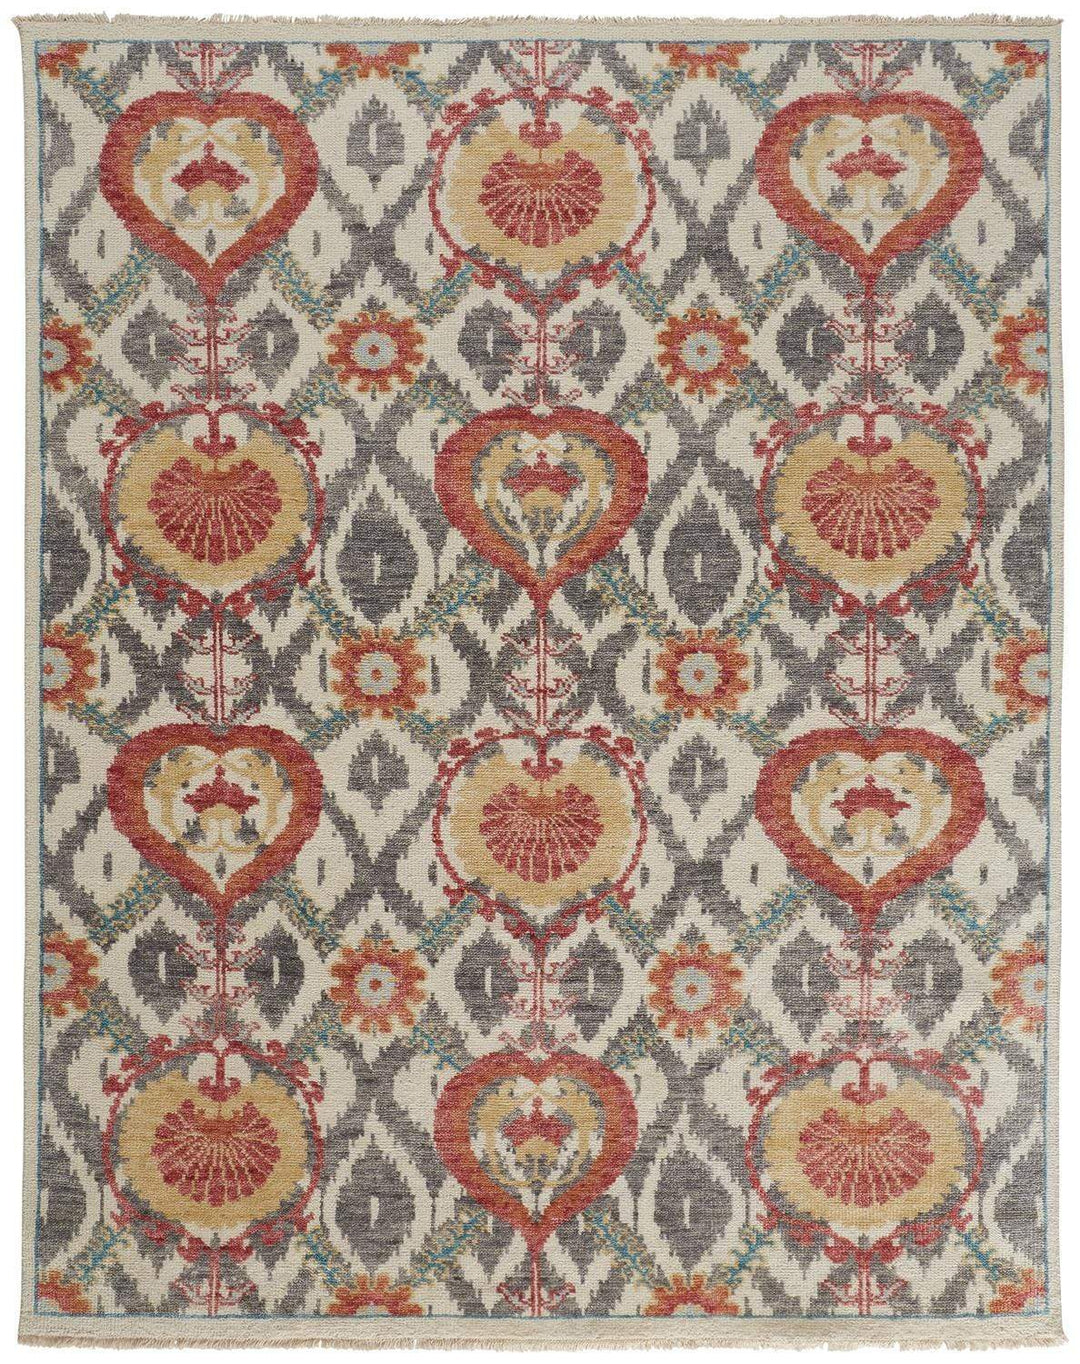 Feizy Feizy Beall Luxury Wool Ornamenatal Ikat Rug - Red Orange - Available in 8 Sizes 3'-6" x 5'-6" BEA6712FRST000C50